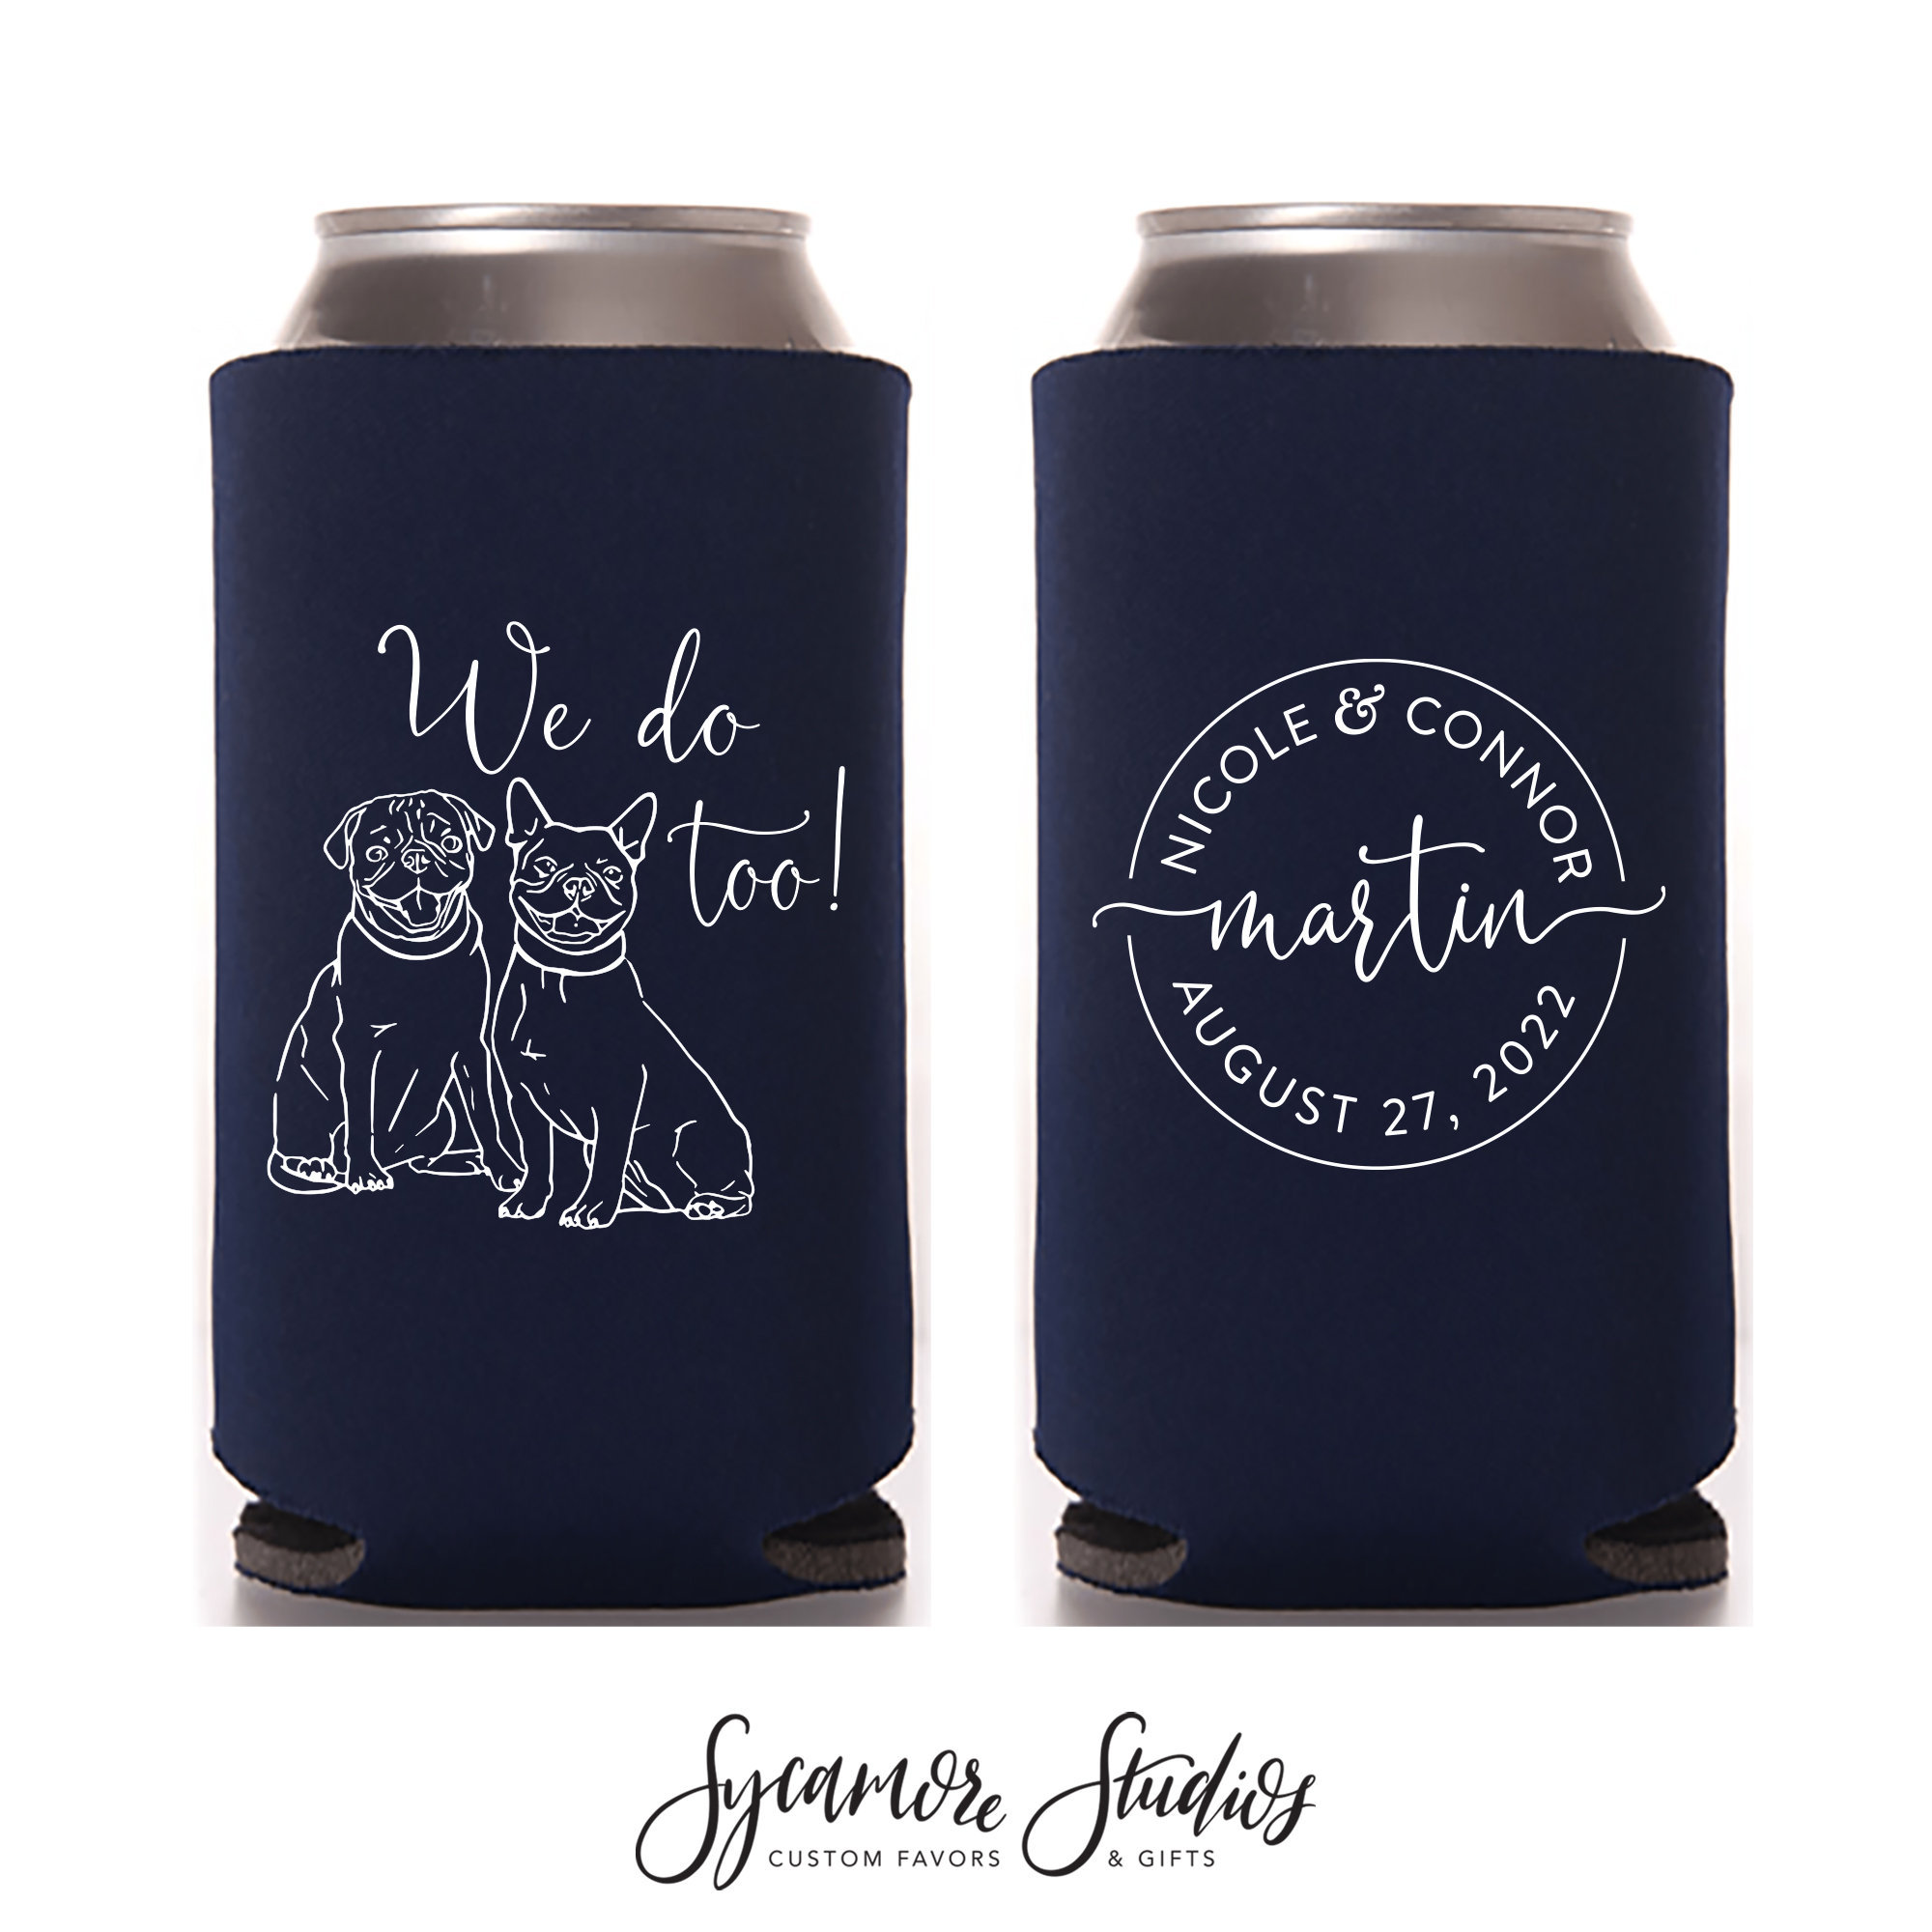 Cat Mom Of the Year Seltzer Koozie – Polished Prints